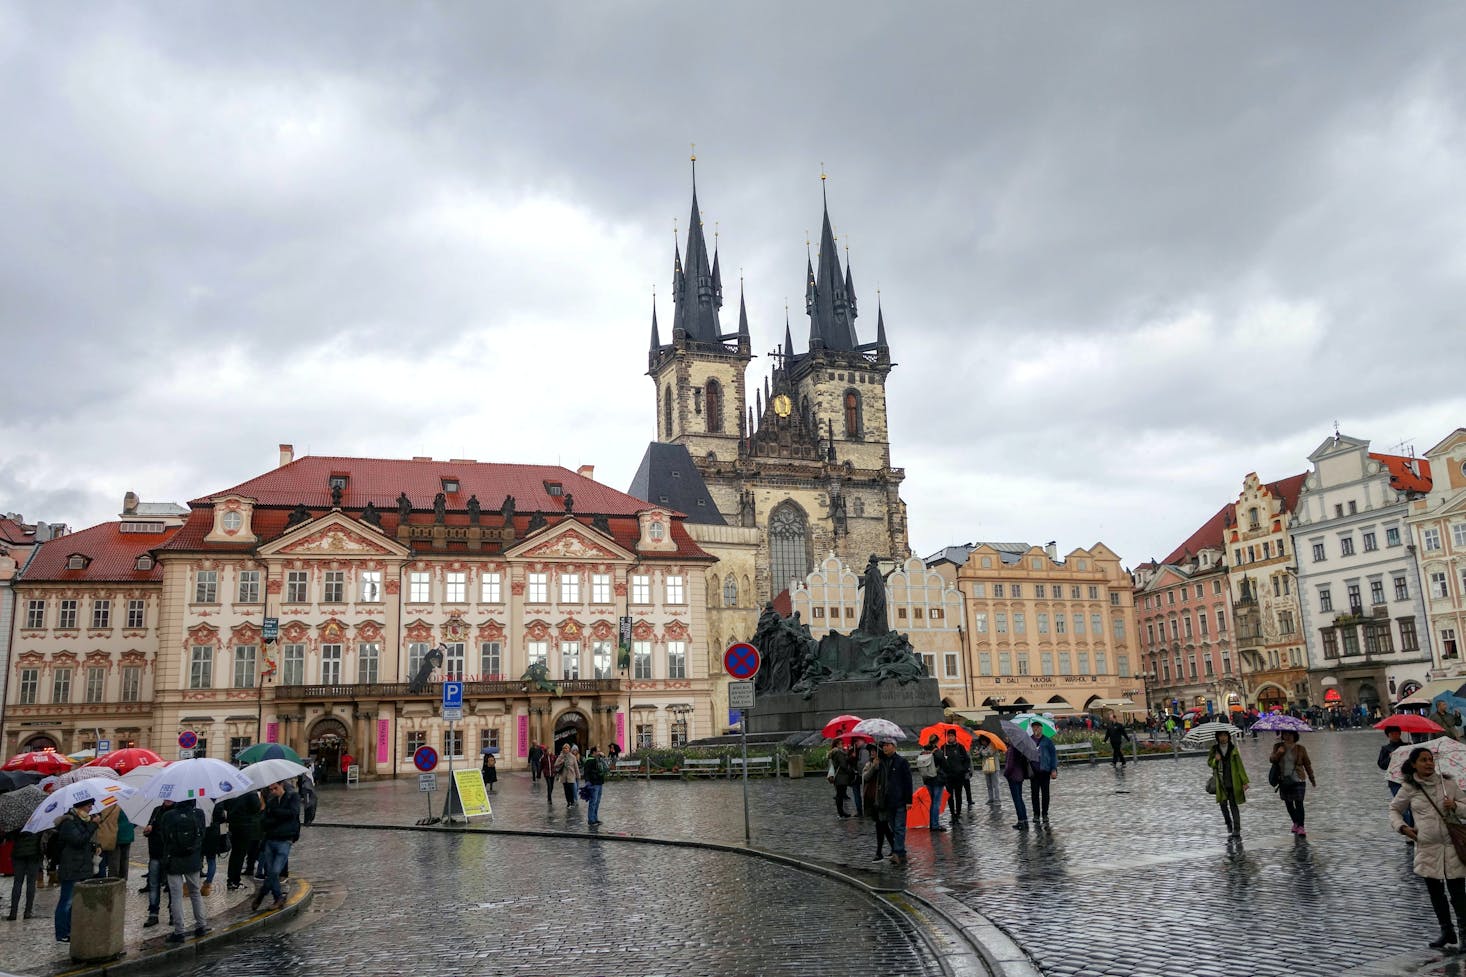 Itinerary for a rainy day in Prague